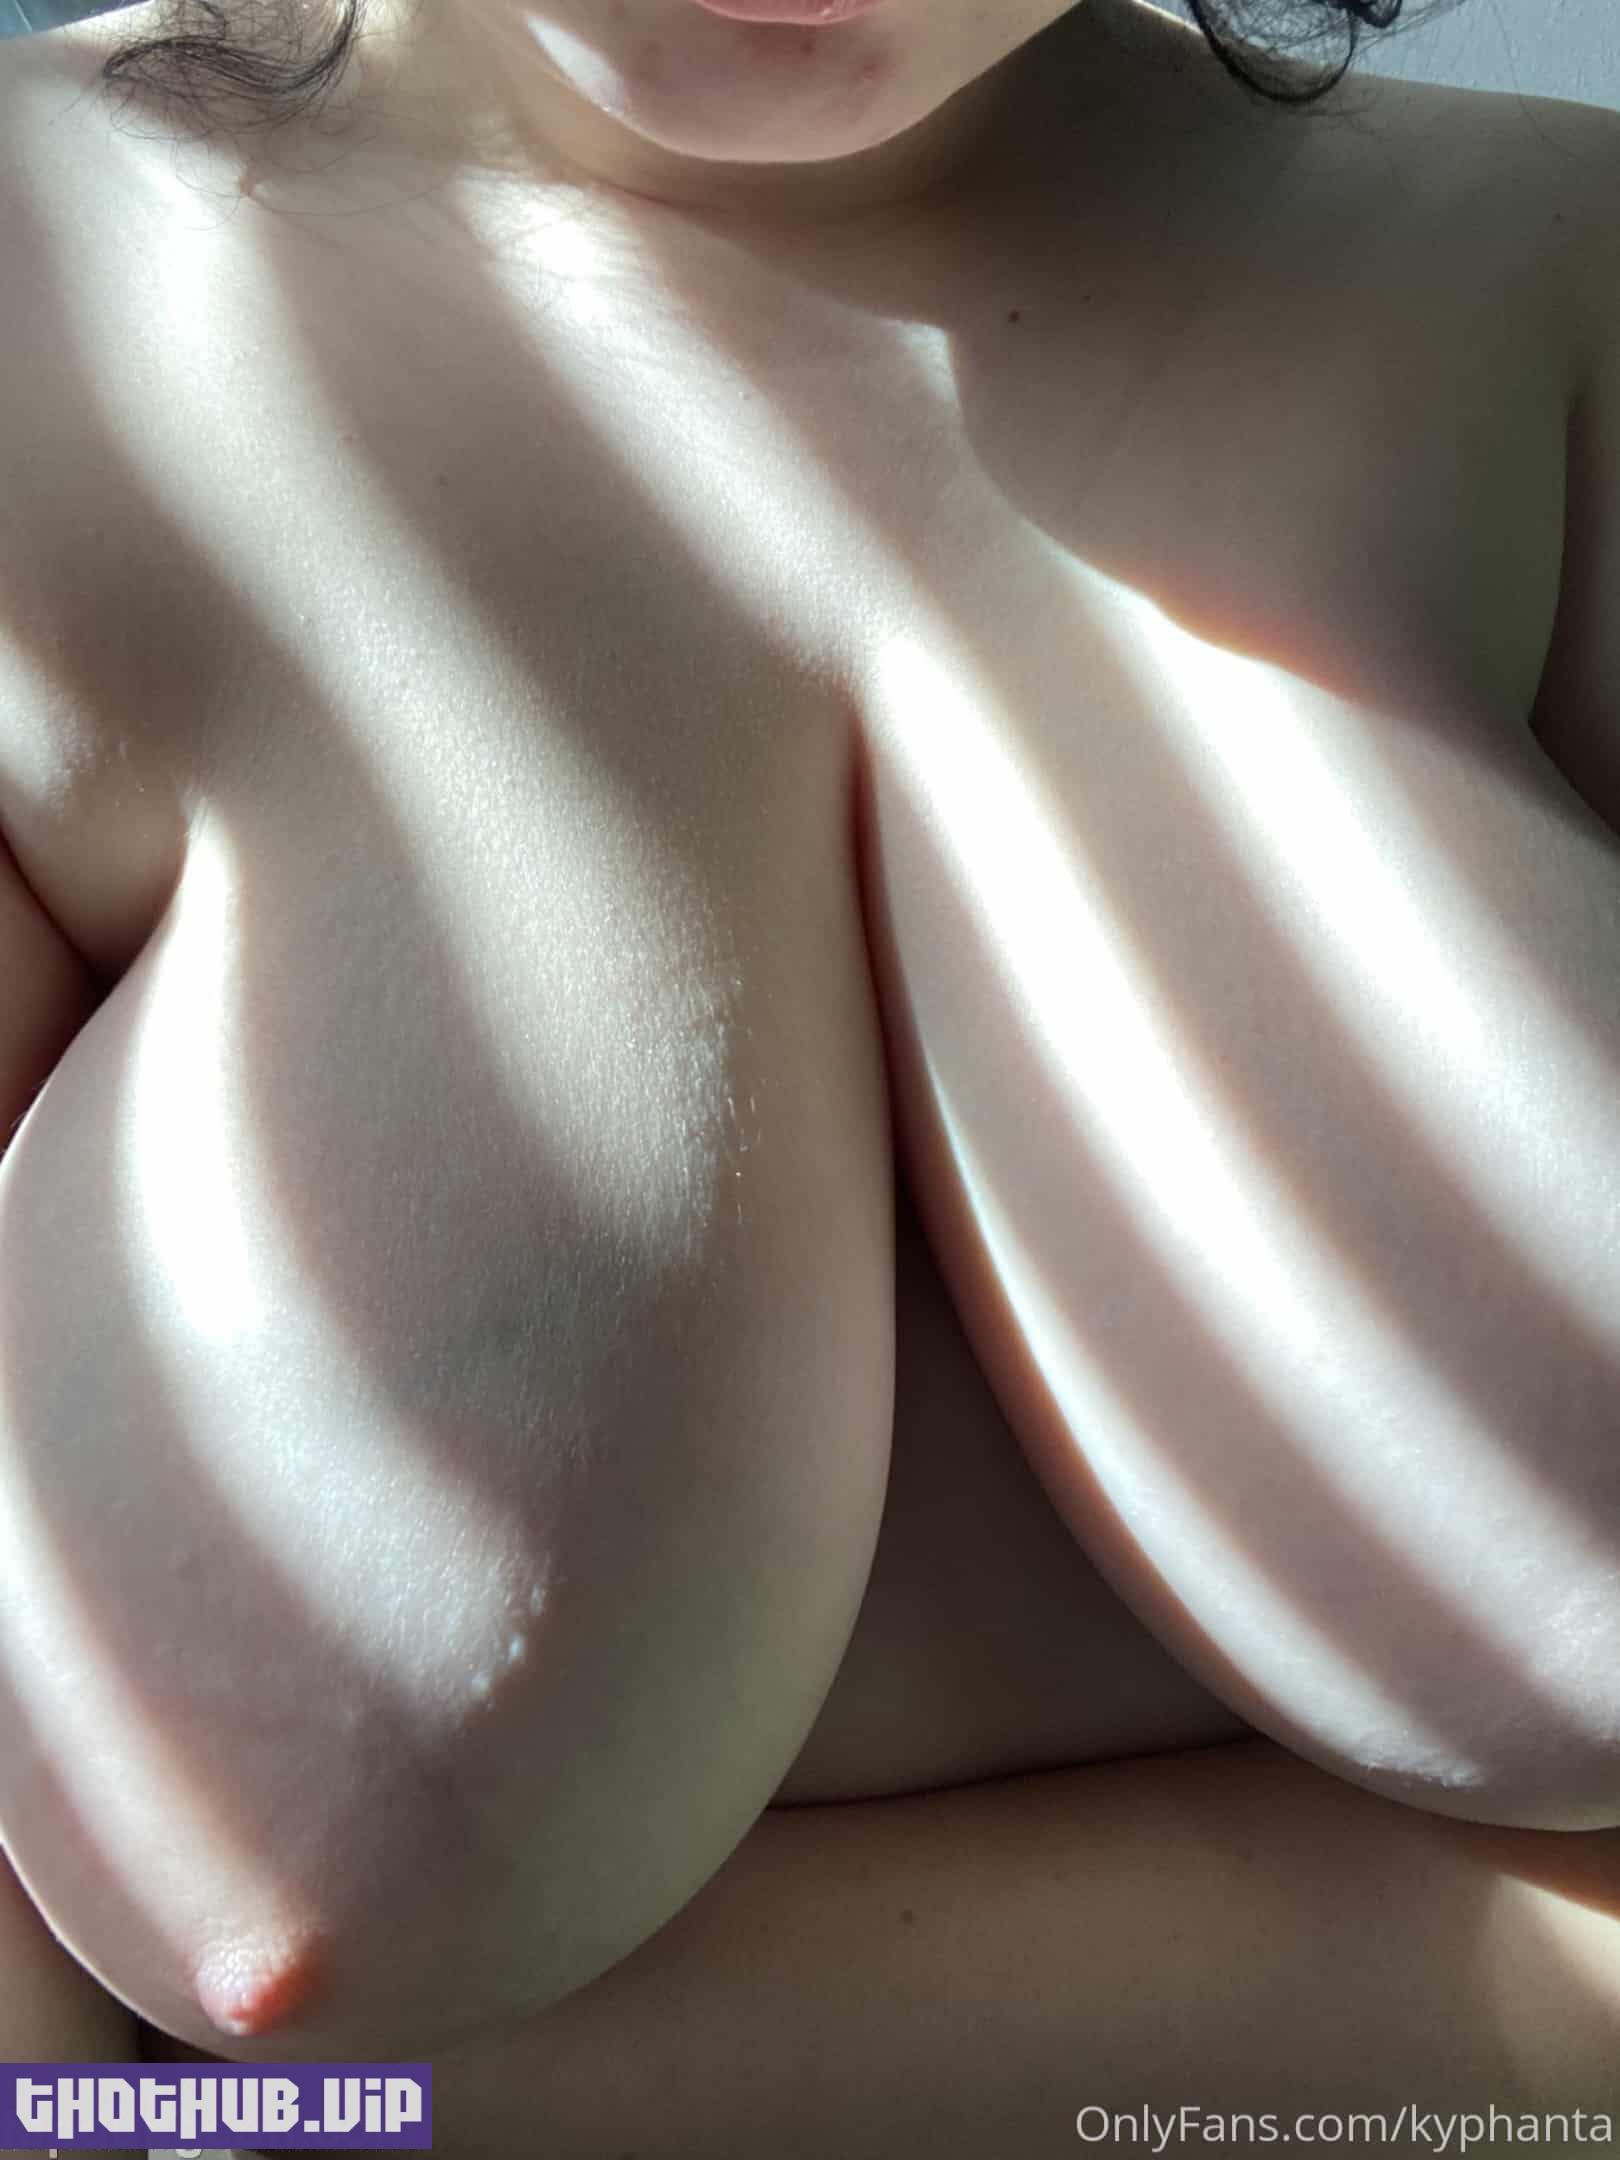 1661261870 926 Kyphanta %E2%80%93 Busty Pale Girl Onlyfans Nudes